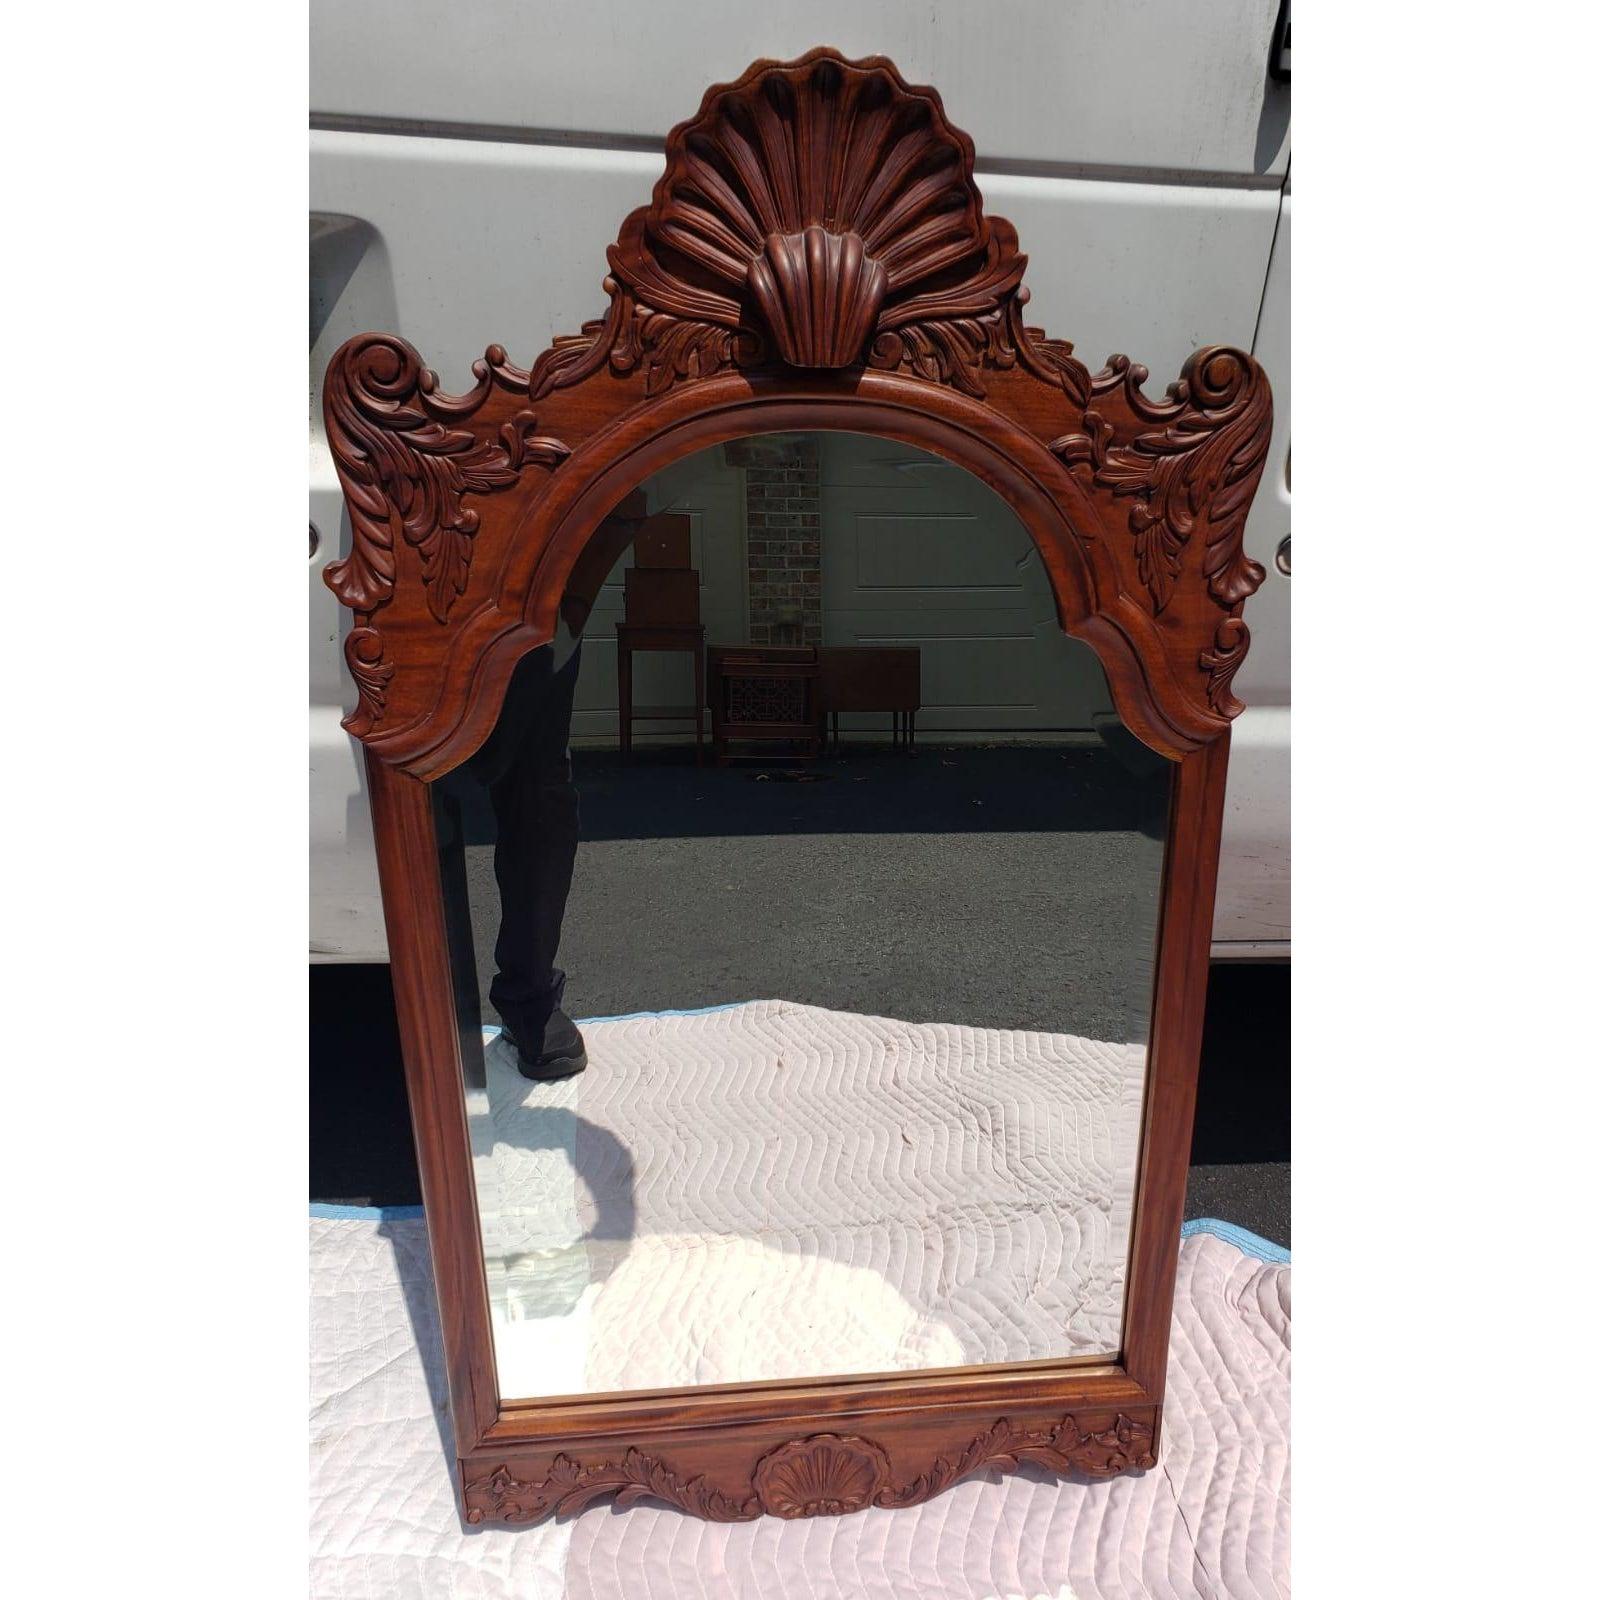 Intricately Carved Mahogany wall mirror. Excellent vintage condition.
Solid Mahogany. Hand carved attributed to the Bradburn Gallery
Measures 25